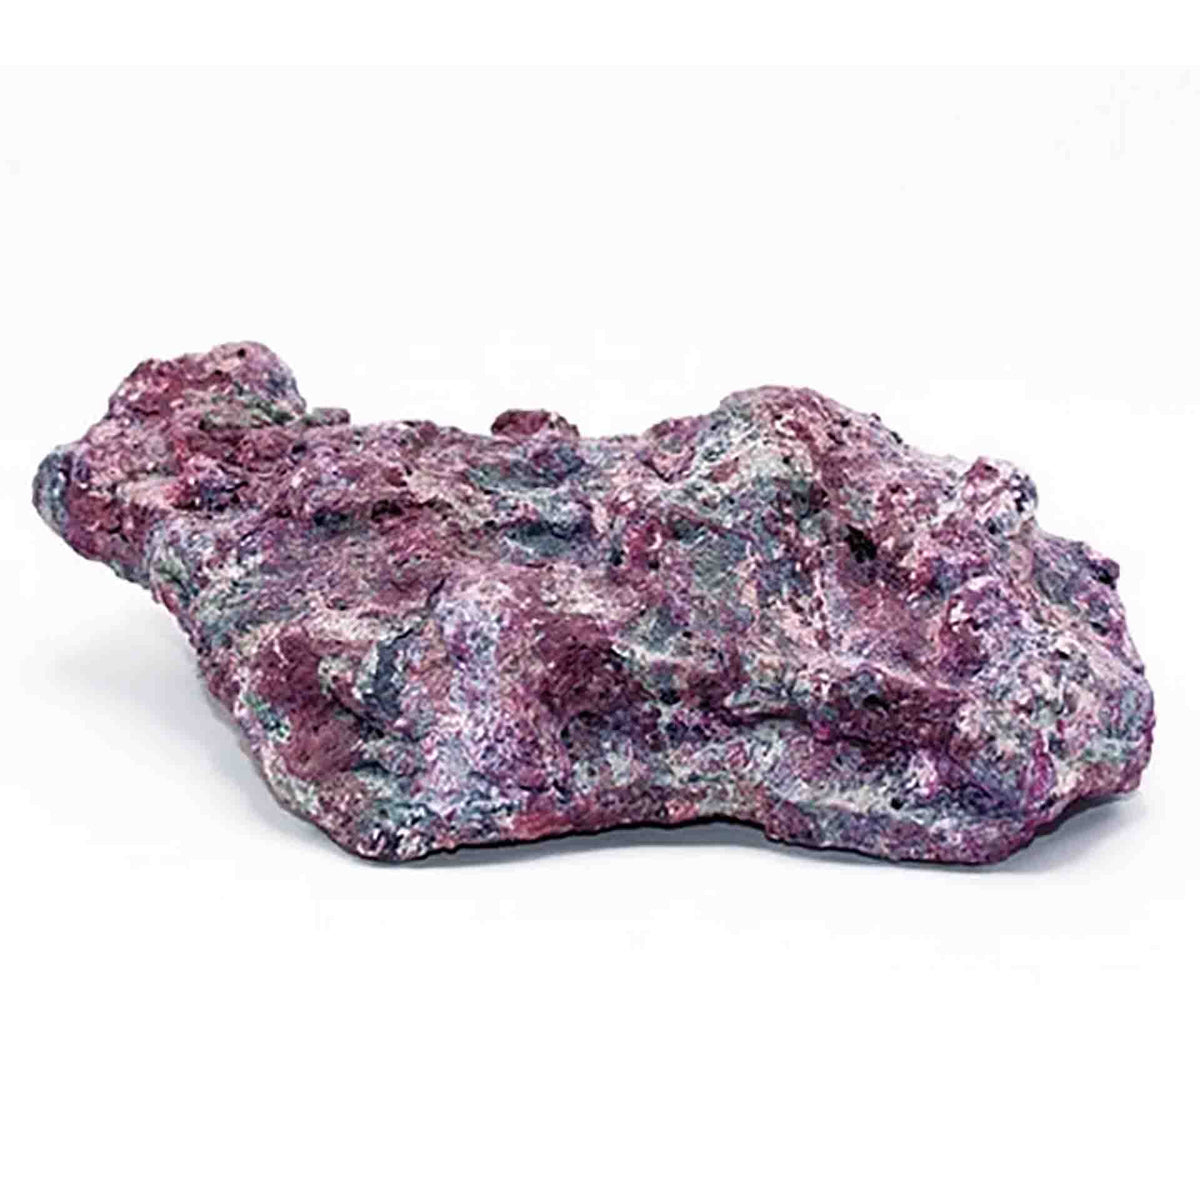 Reef Plates - Java Reef Rock - Sold per 100g - In Store Pick Up Only